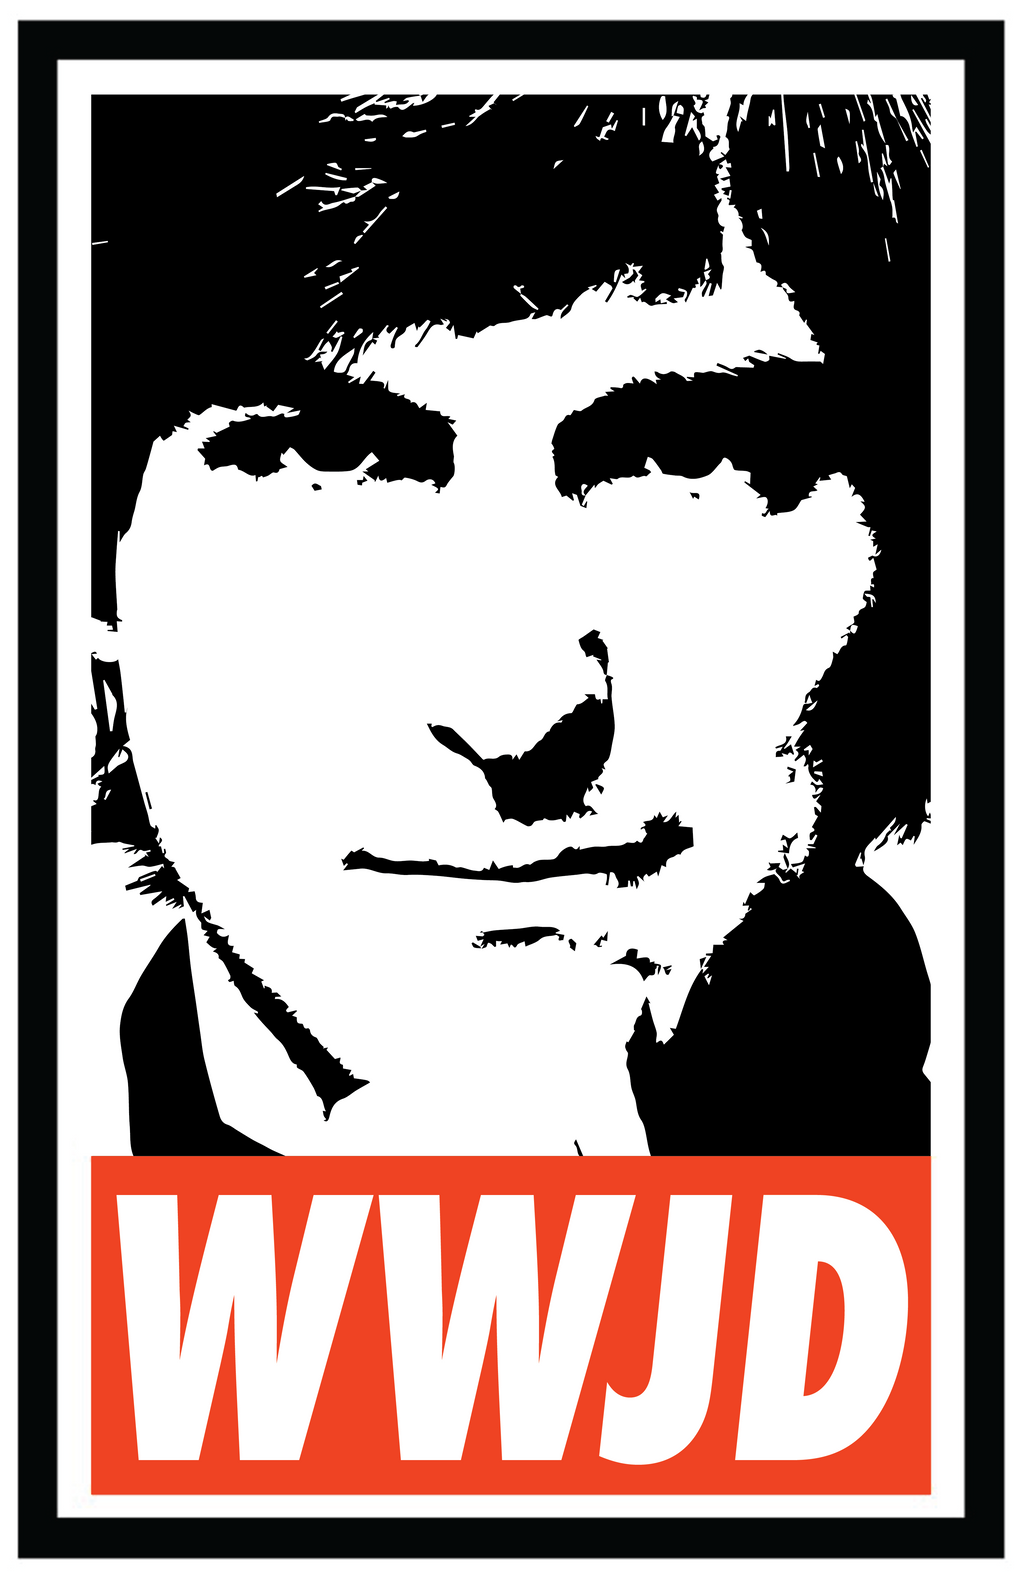 A black and white depiction of Steve Jobs with the letters "W W J D" inside a red box below it.